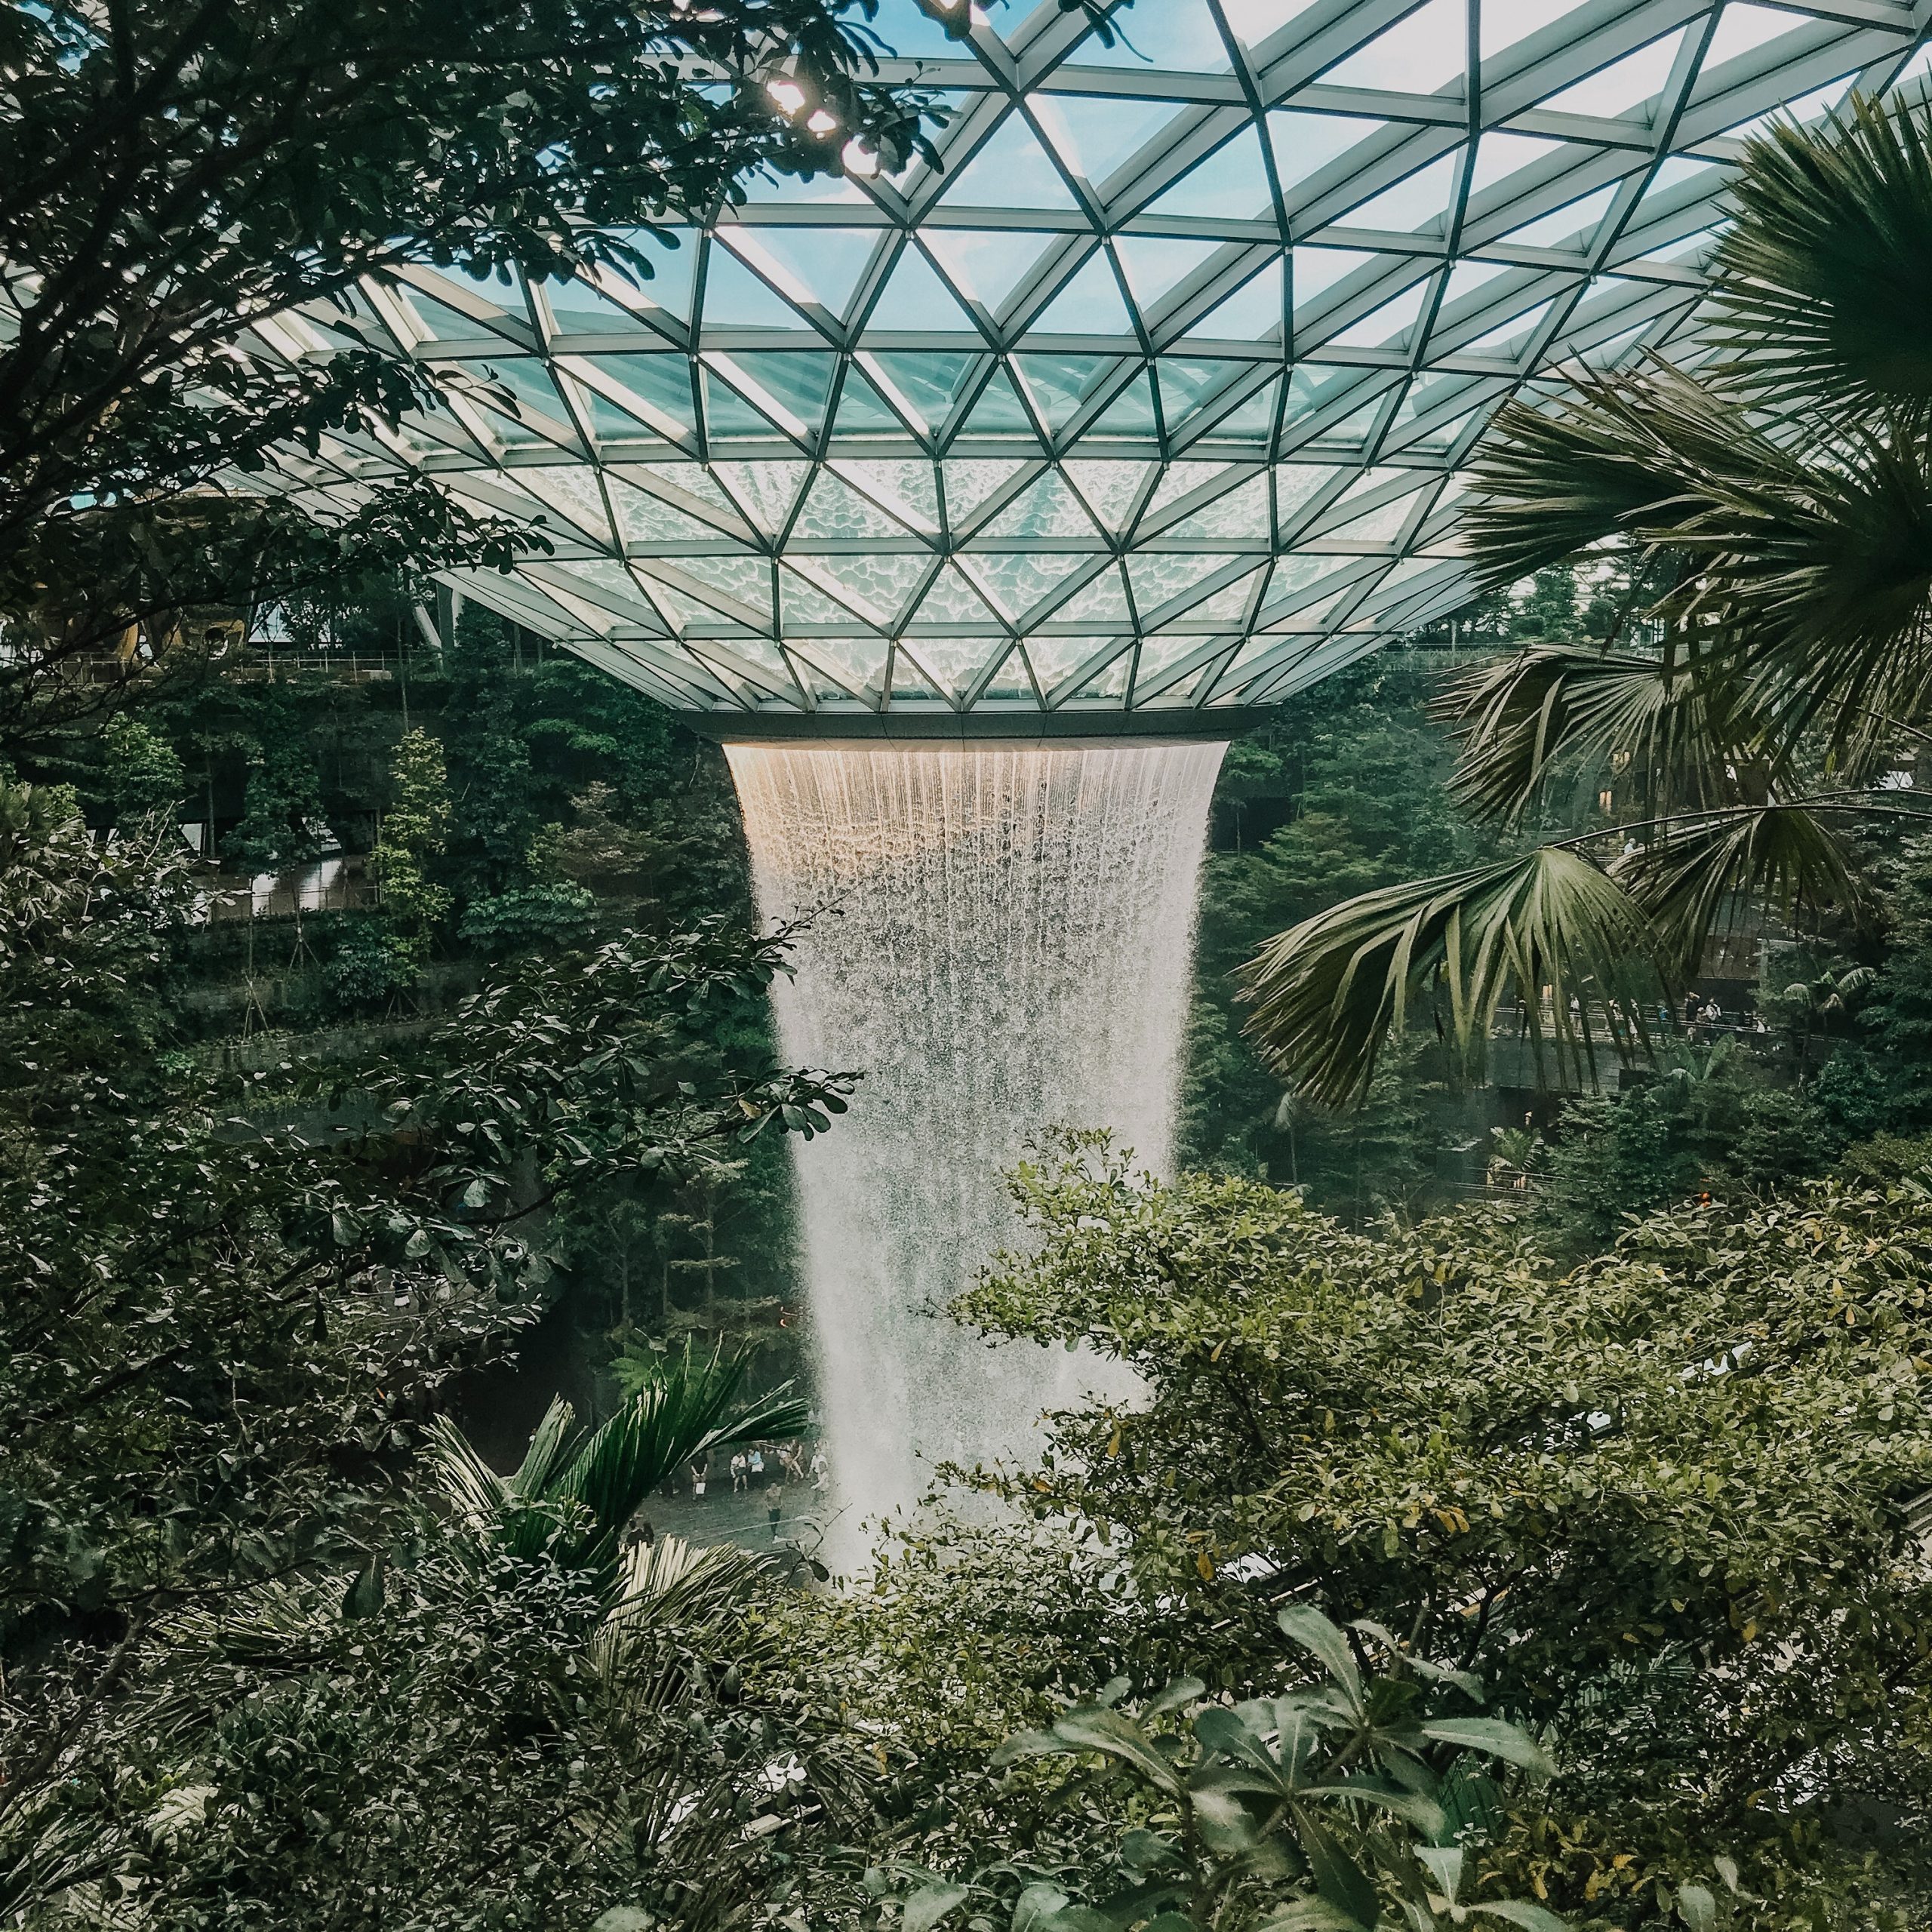 Day 5: Exploring Gardens by the Bay and Marina Bay Sands